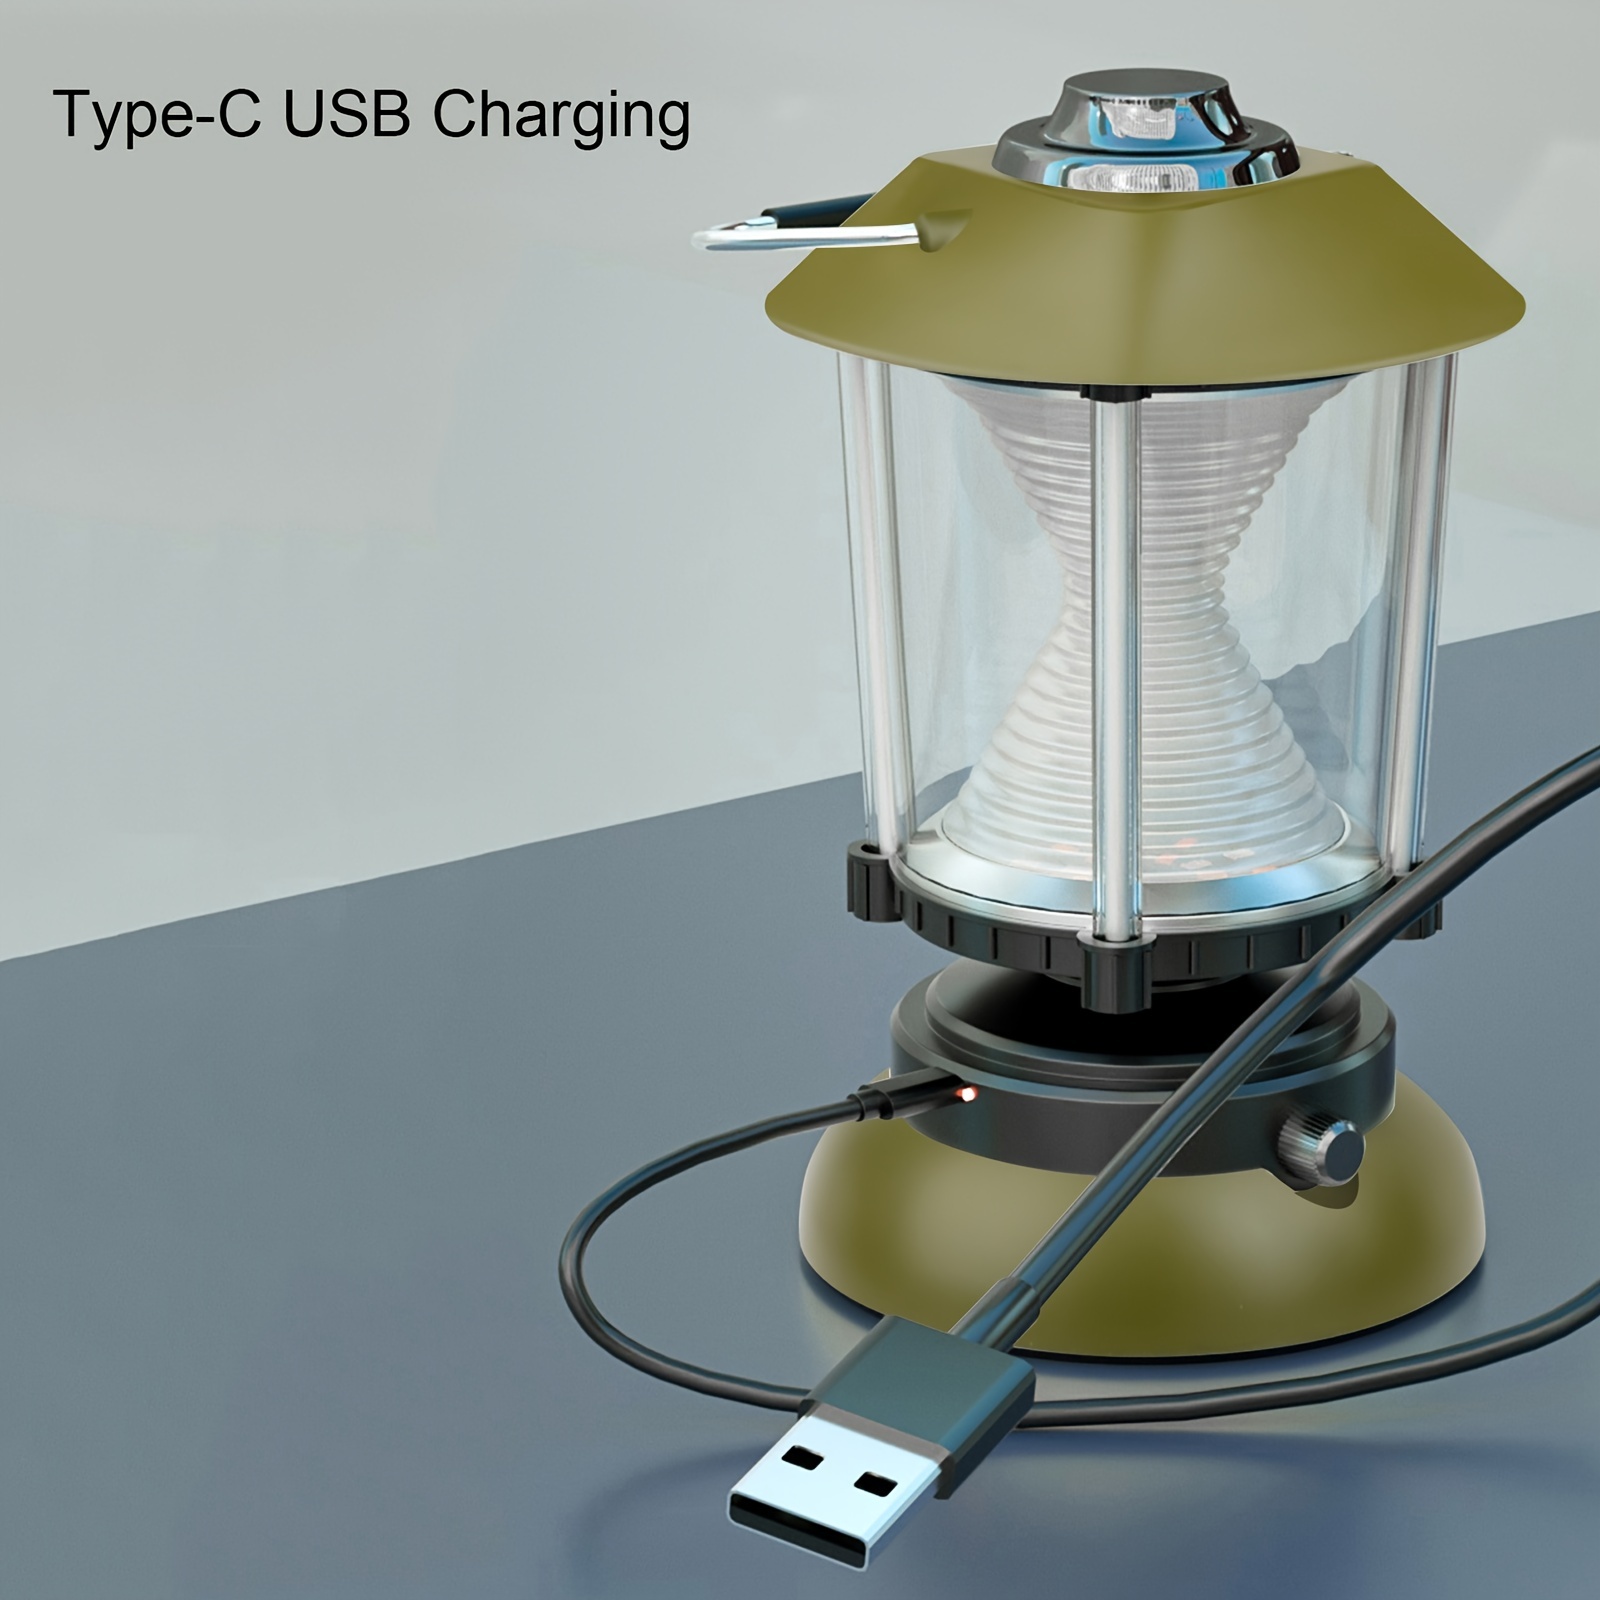 Rechargeable USB LED Camping Lantern - Stepless Adjustment, AA Battery  Powered, Portable, Waterproof, Emergency Lighting